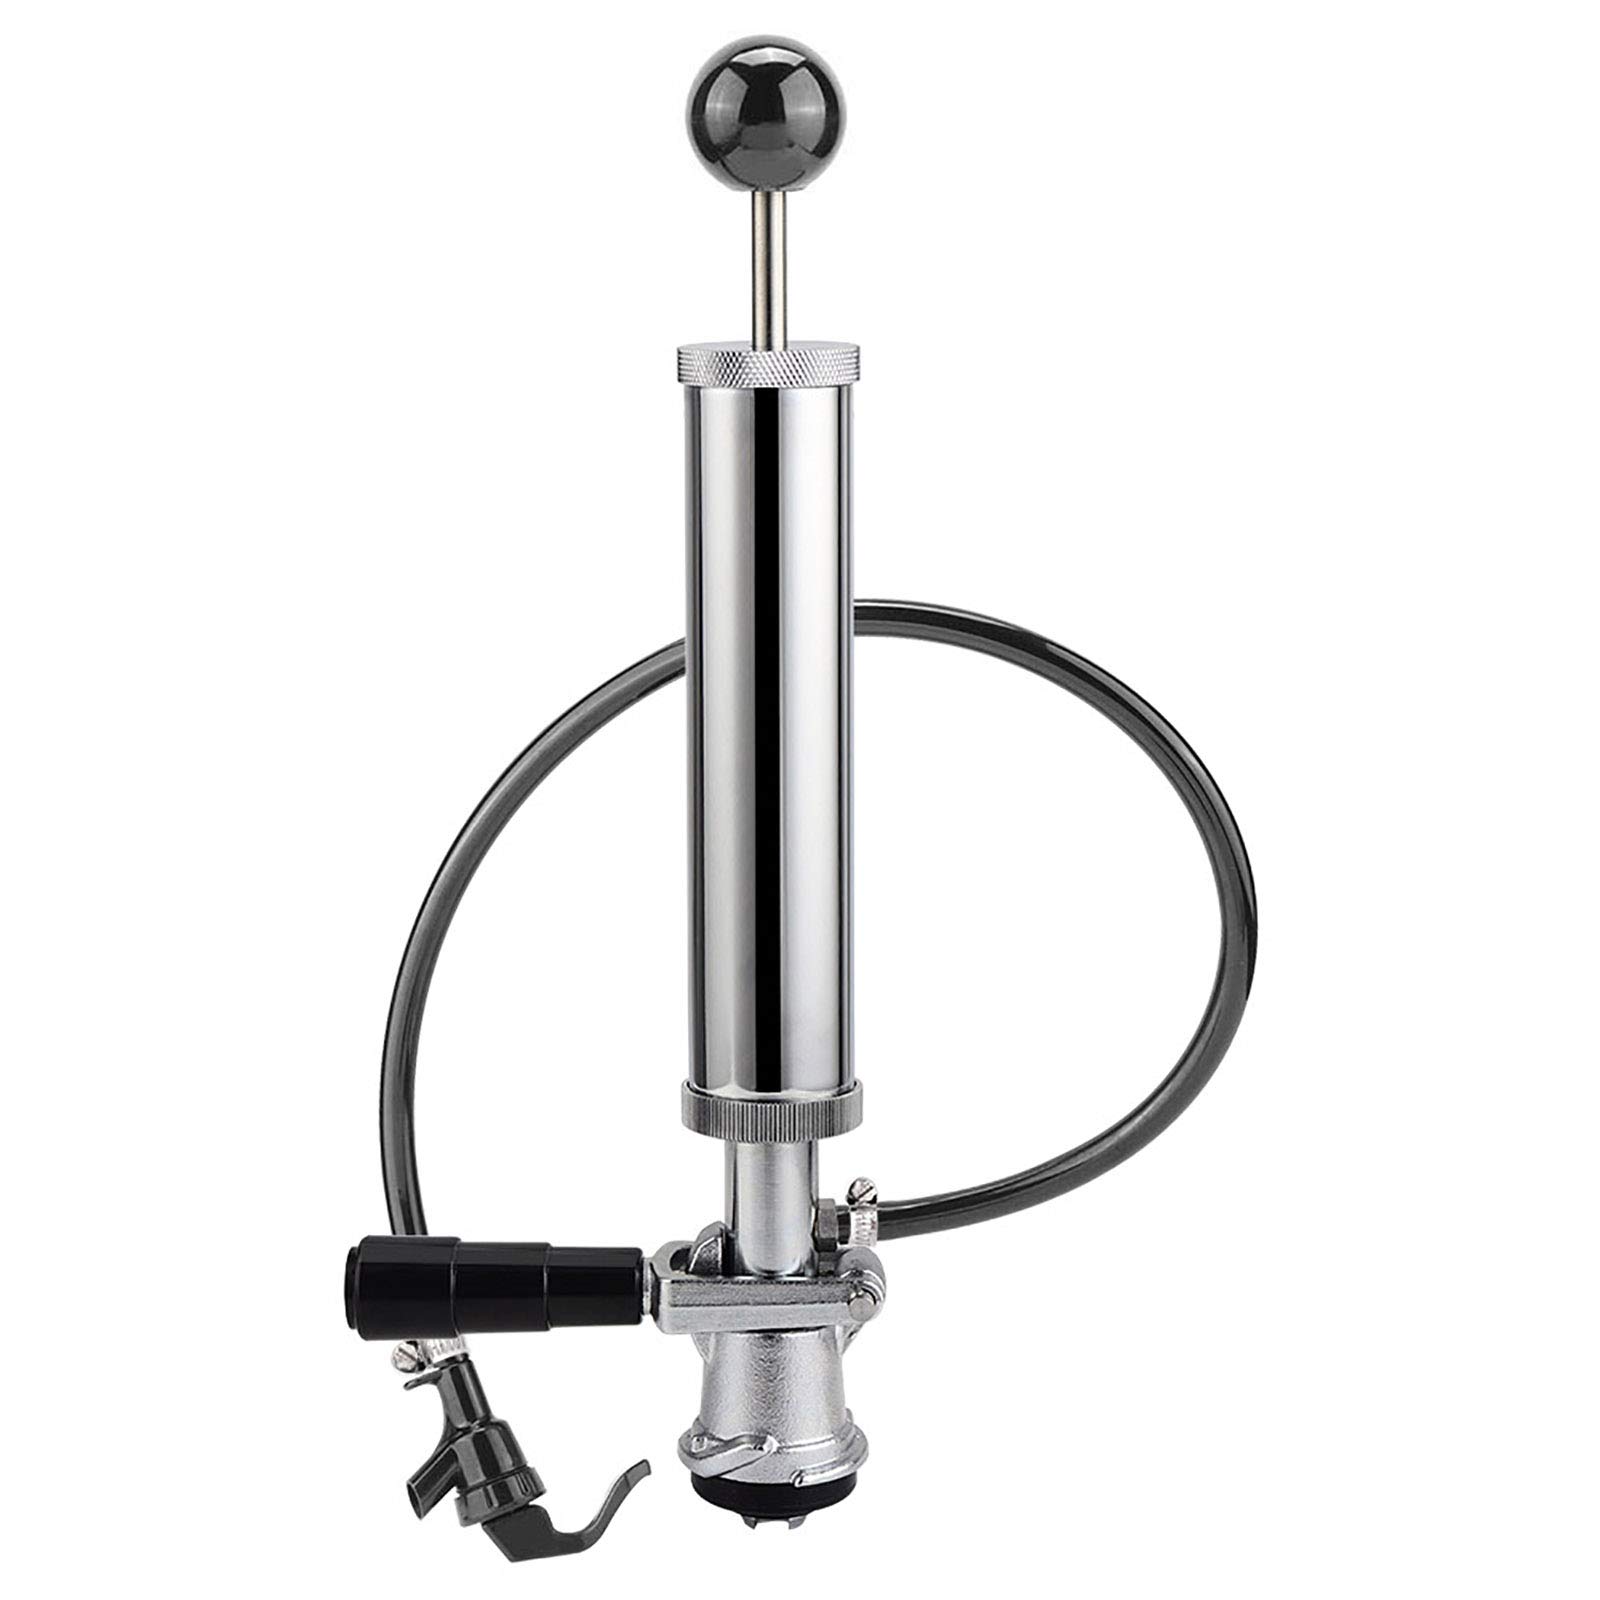 MRbrew Keg Party pump, American D System Beer Keg Tap Party Pump, 8 Inch Picnic Pump with Black Beer Faucet & Beer Hose, Chrome-Plated Keg Draft Be...